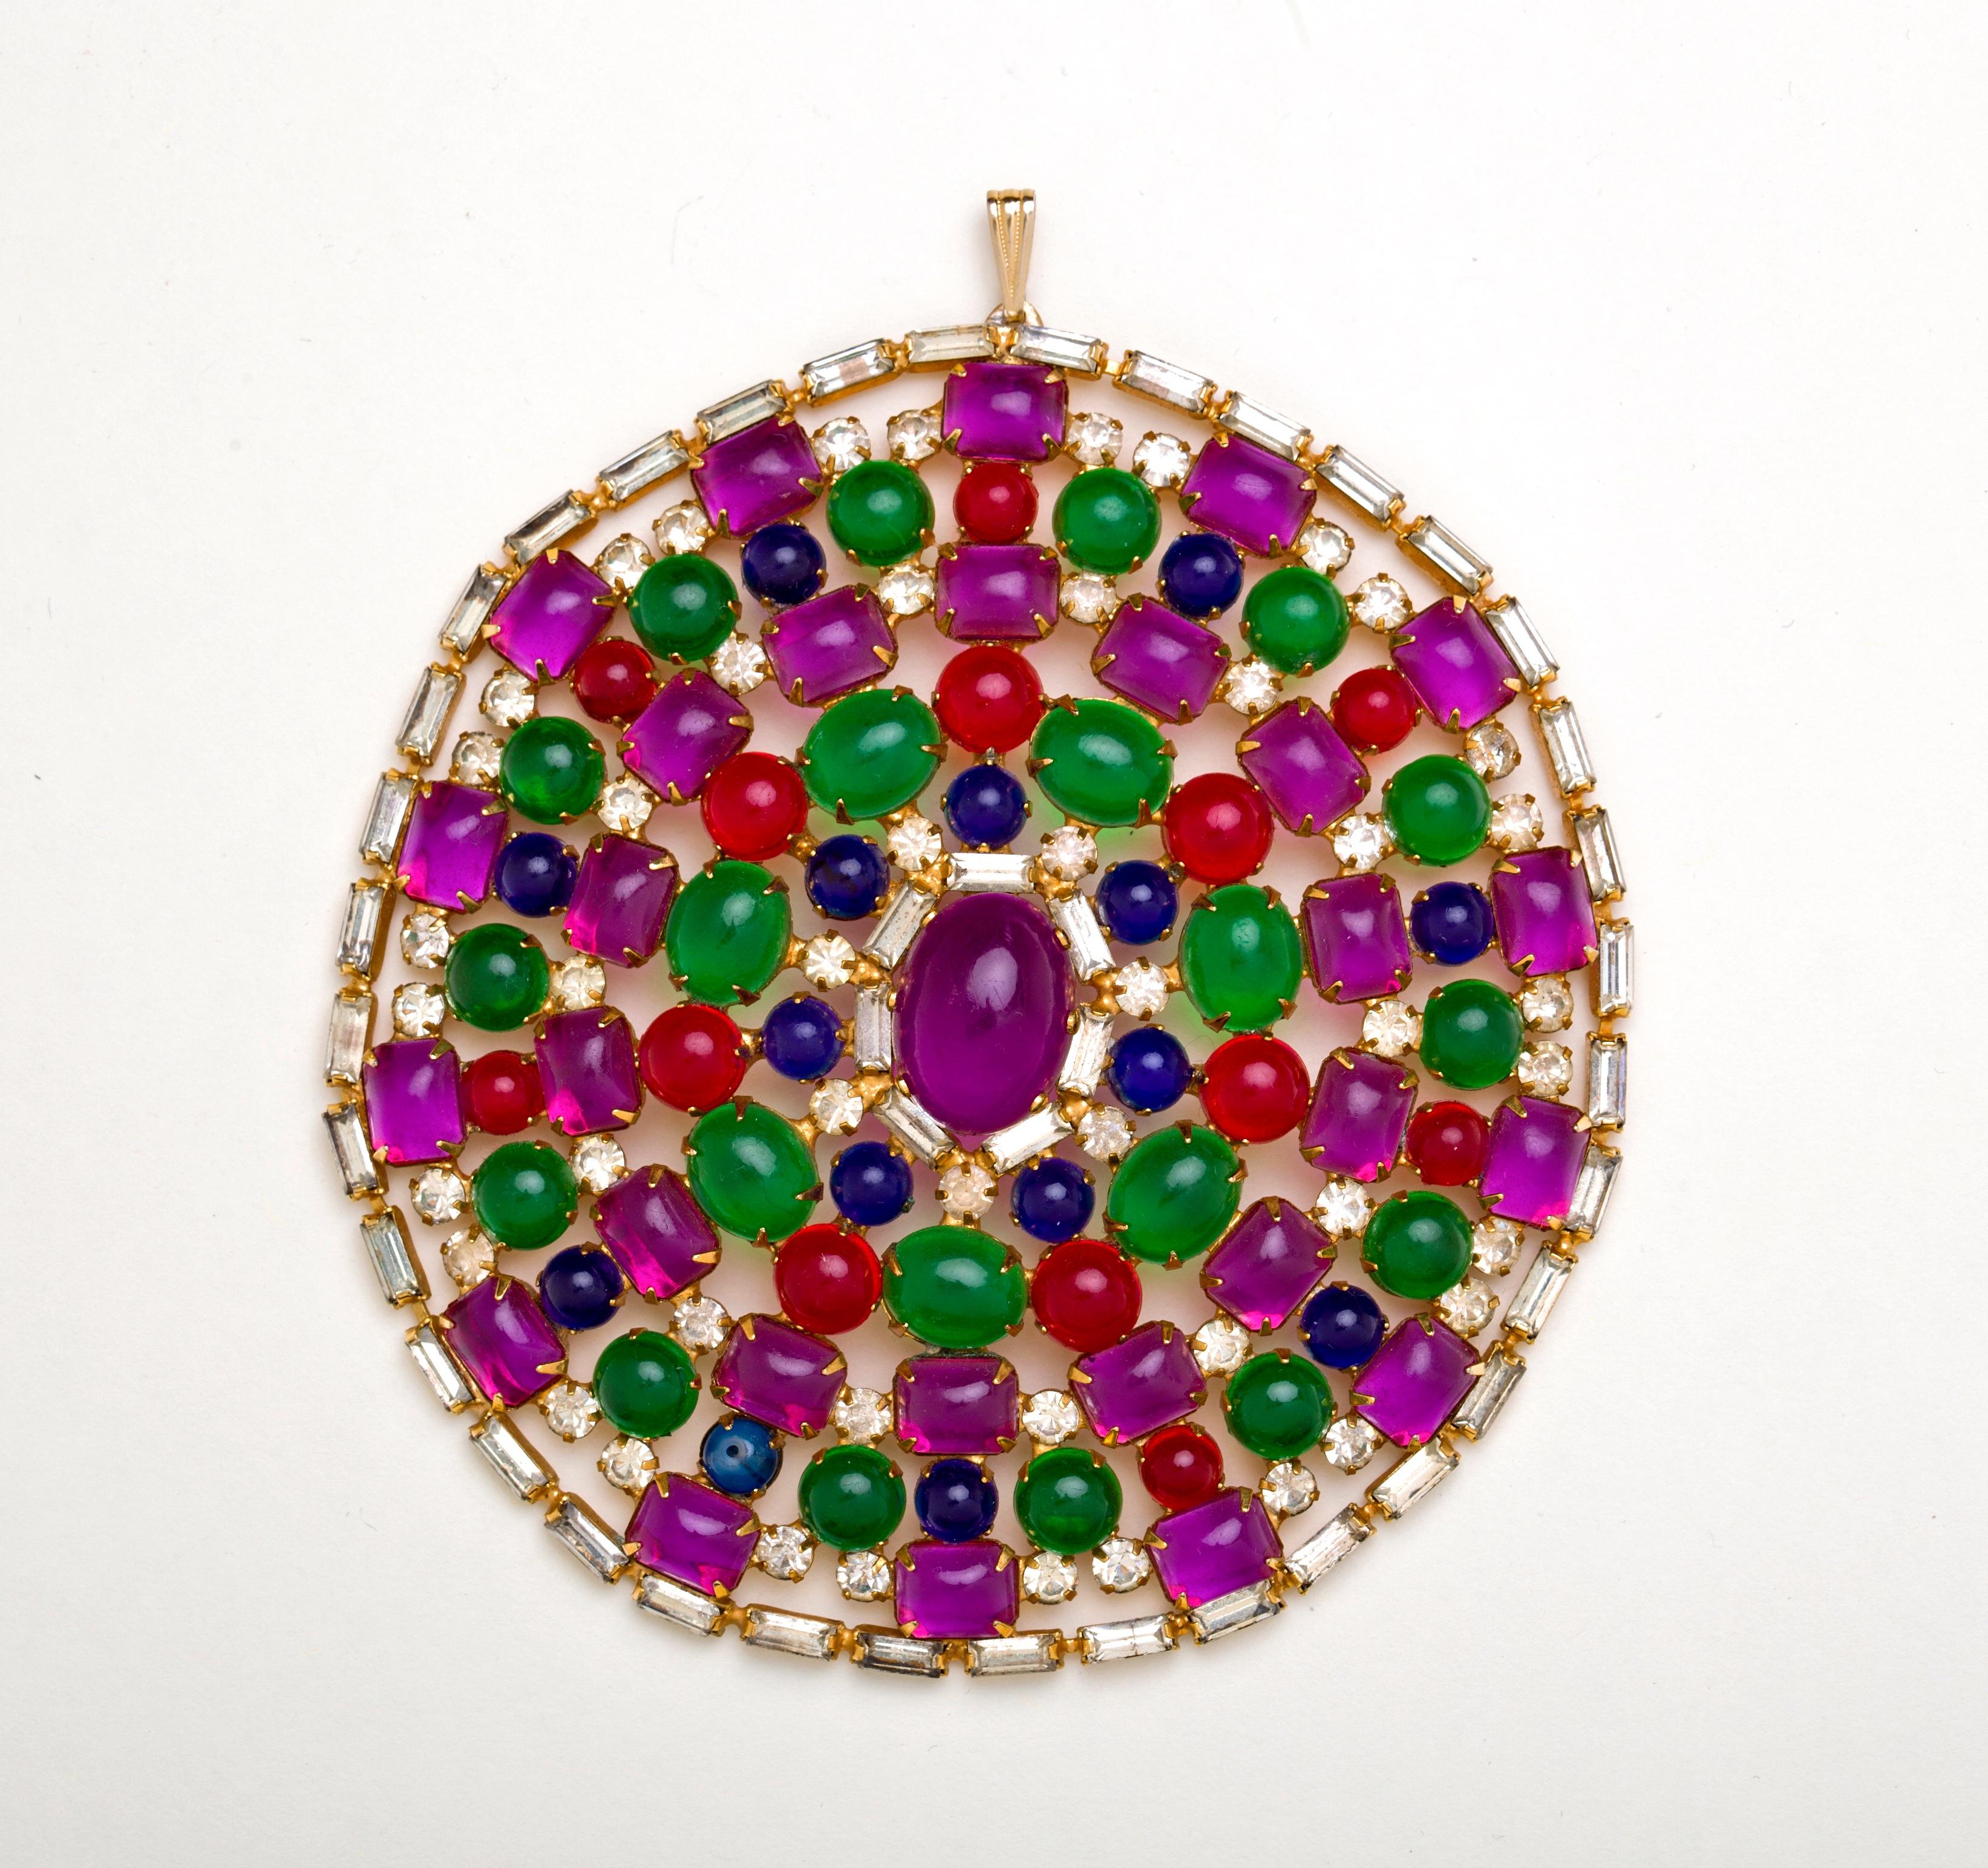 Stunning and colorful is this extra large K.J.L. Cabochon necklace from the K.J.L. workshop in Providence, 1967.  Faux Amethyst, ruby, sapphire and emerald cabochons, mounted round and baguette diamonds create this exceptional pendant.   A true